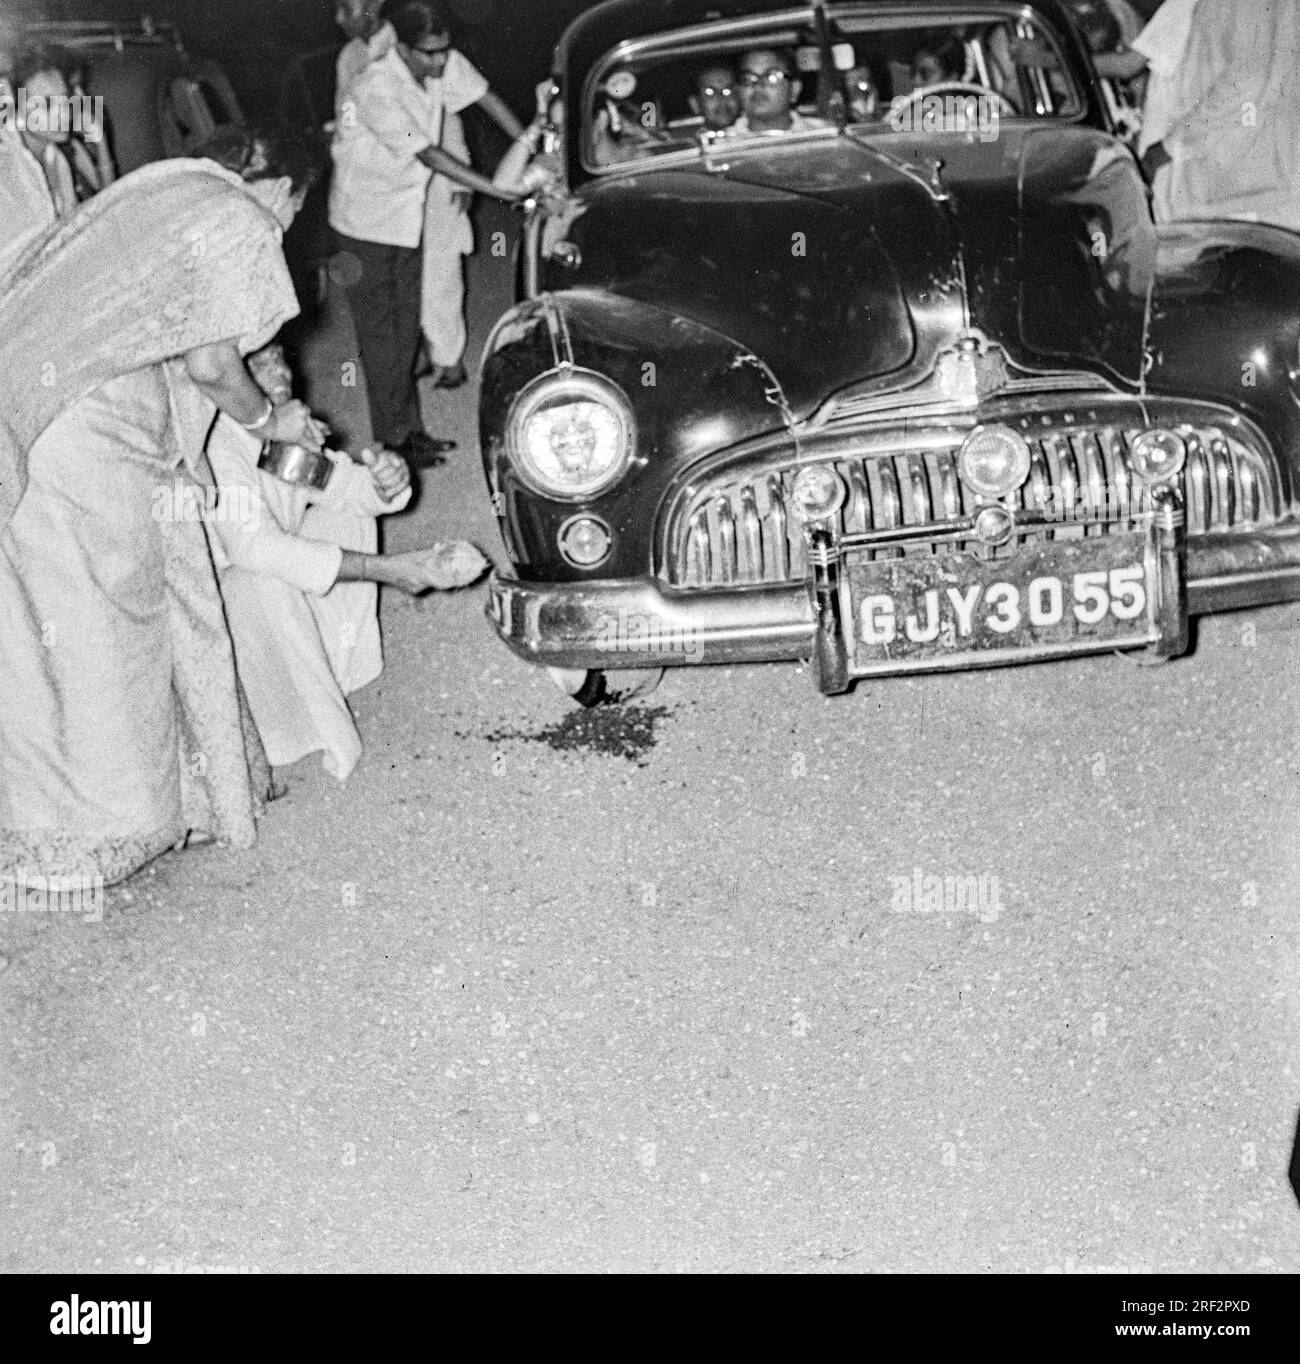 old vintage 1900s black and white picture of breaking auspicious coconut welcome sign new Buick car GJY 3055 India 1940s Stock Photo